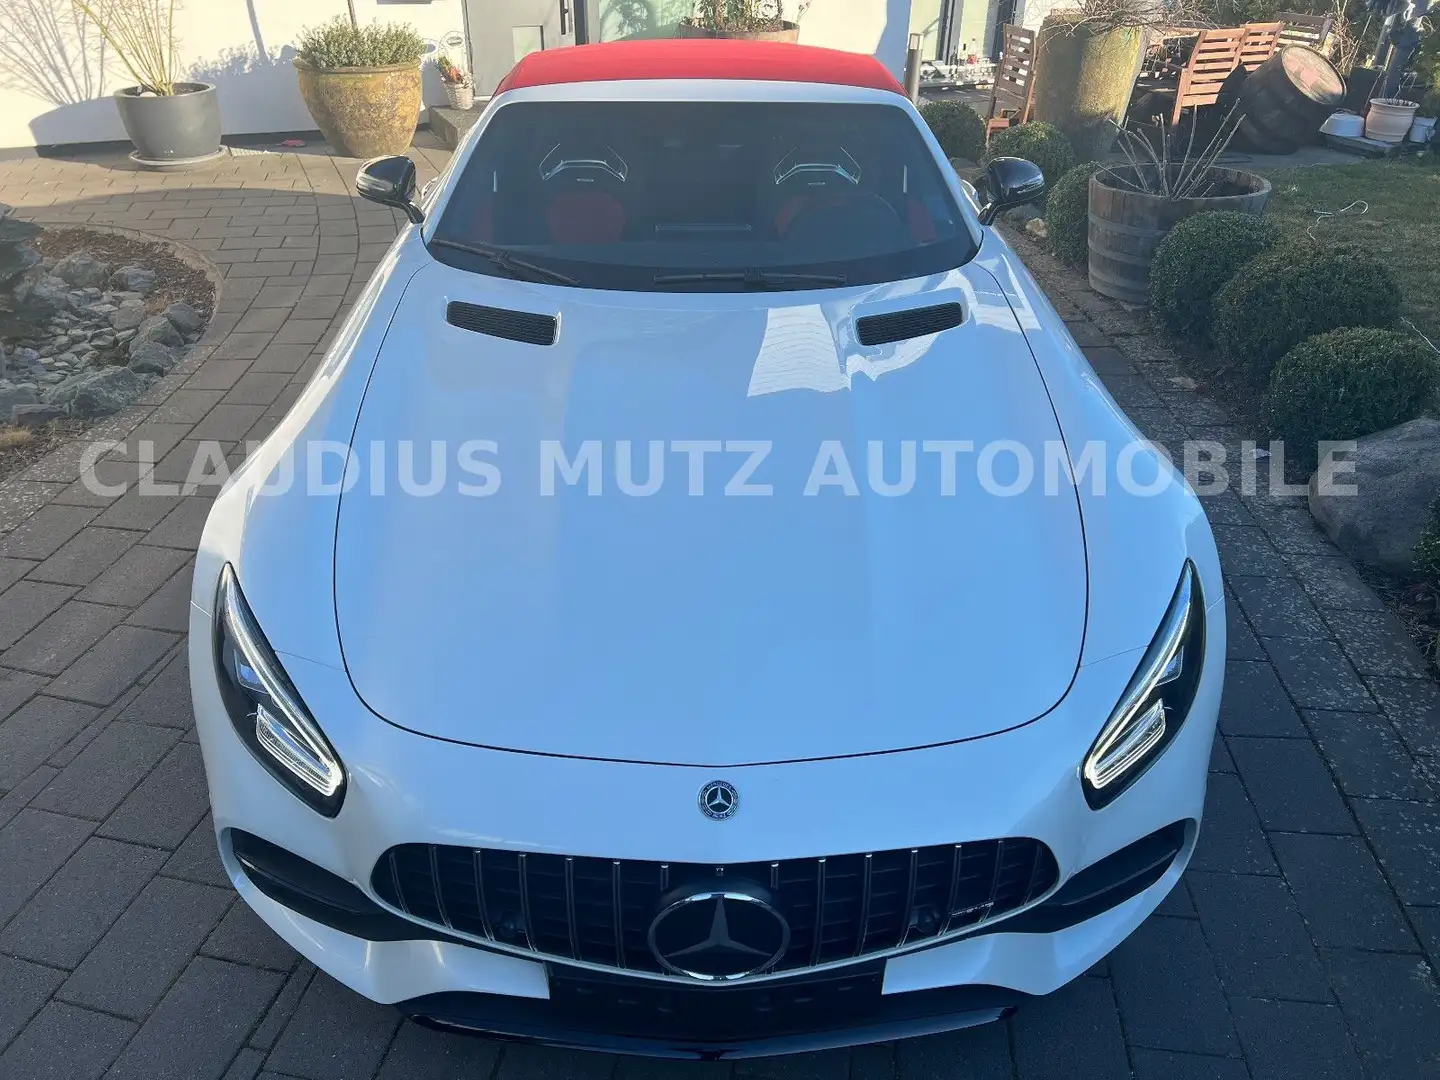 Mercedes-Benz AMG GT Roadster °white/red° NIGHT °° IN STOCK °° Weiß - 2